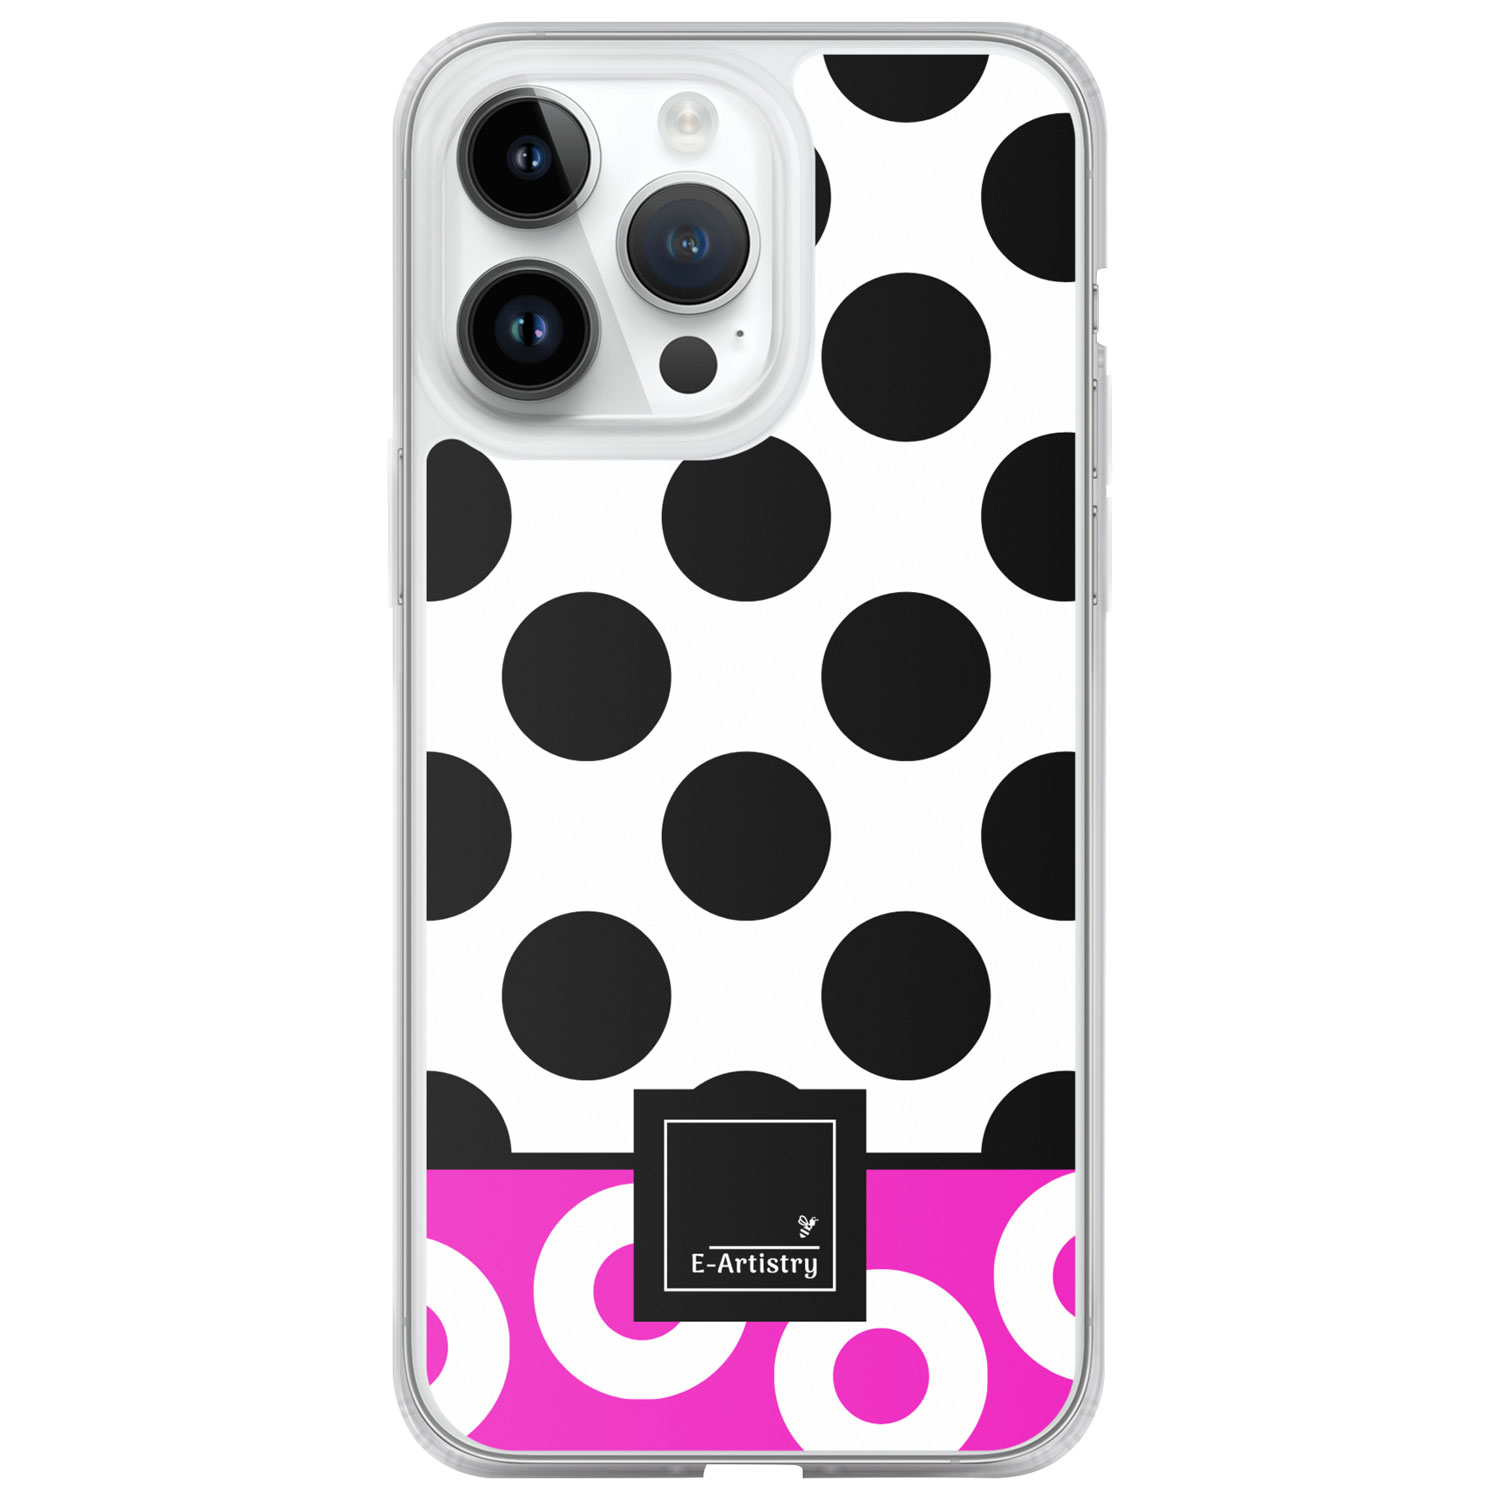 E-Artistry Lottie Dottie Fitted Hard Shell Case for iPhone 14 Pro Max - Watermelon/Pink